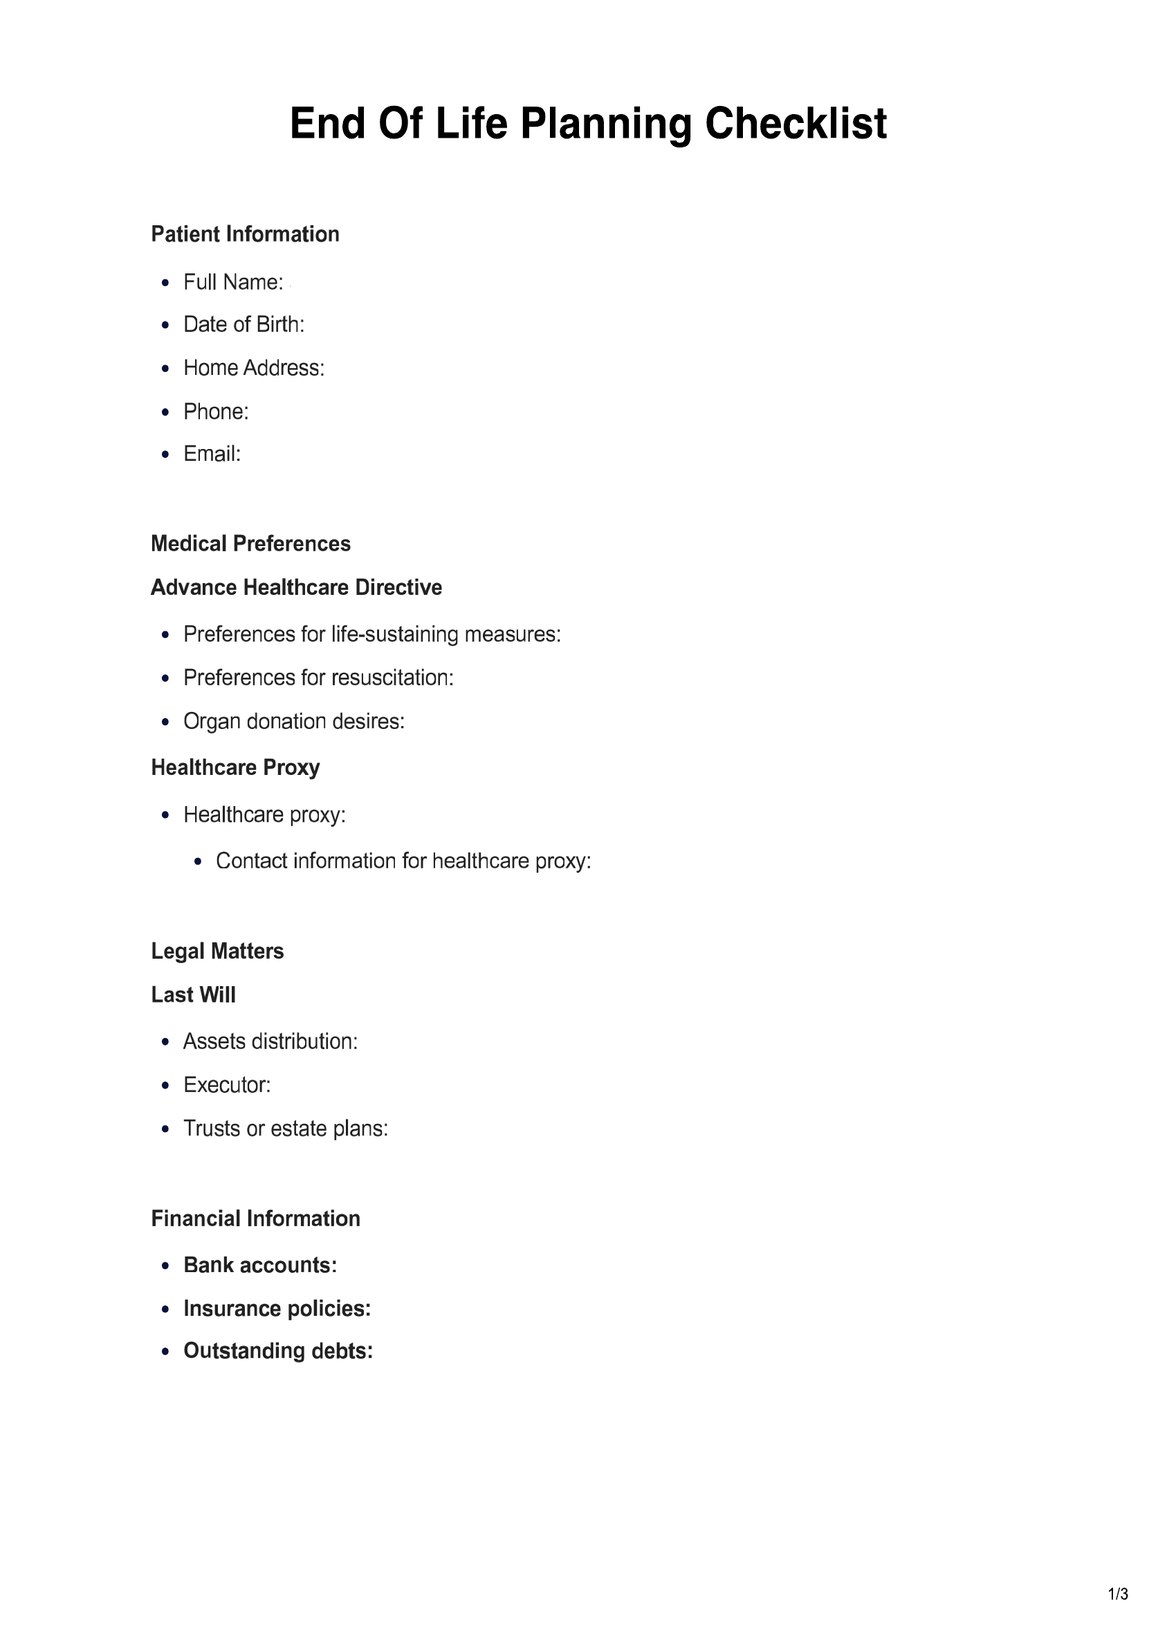 End Of Life Planning Checklist PDF Example